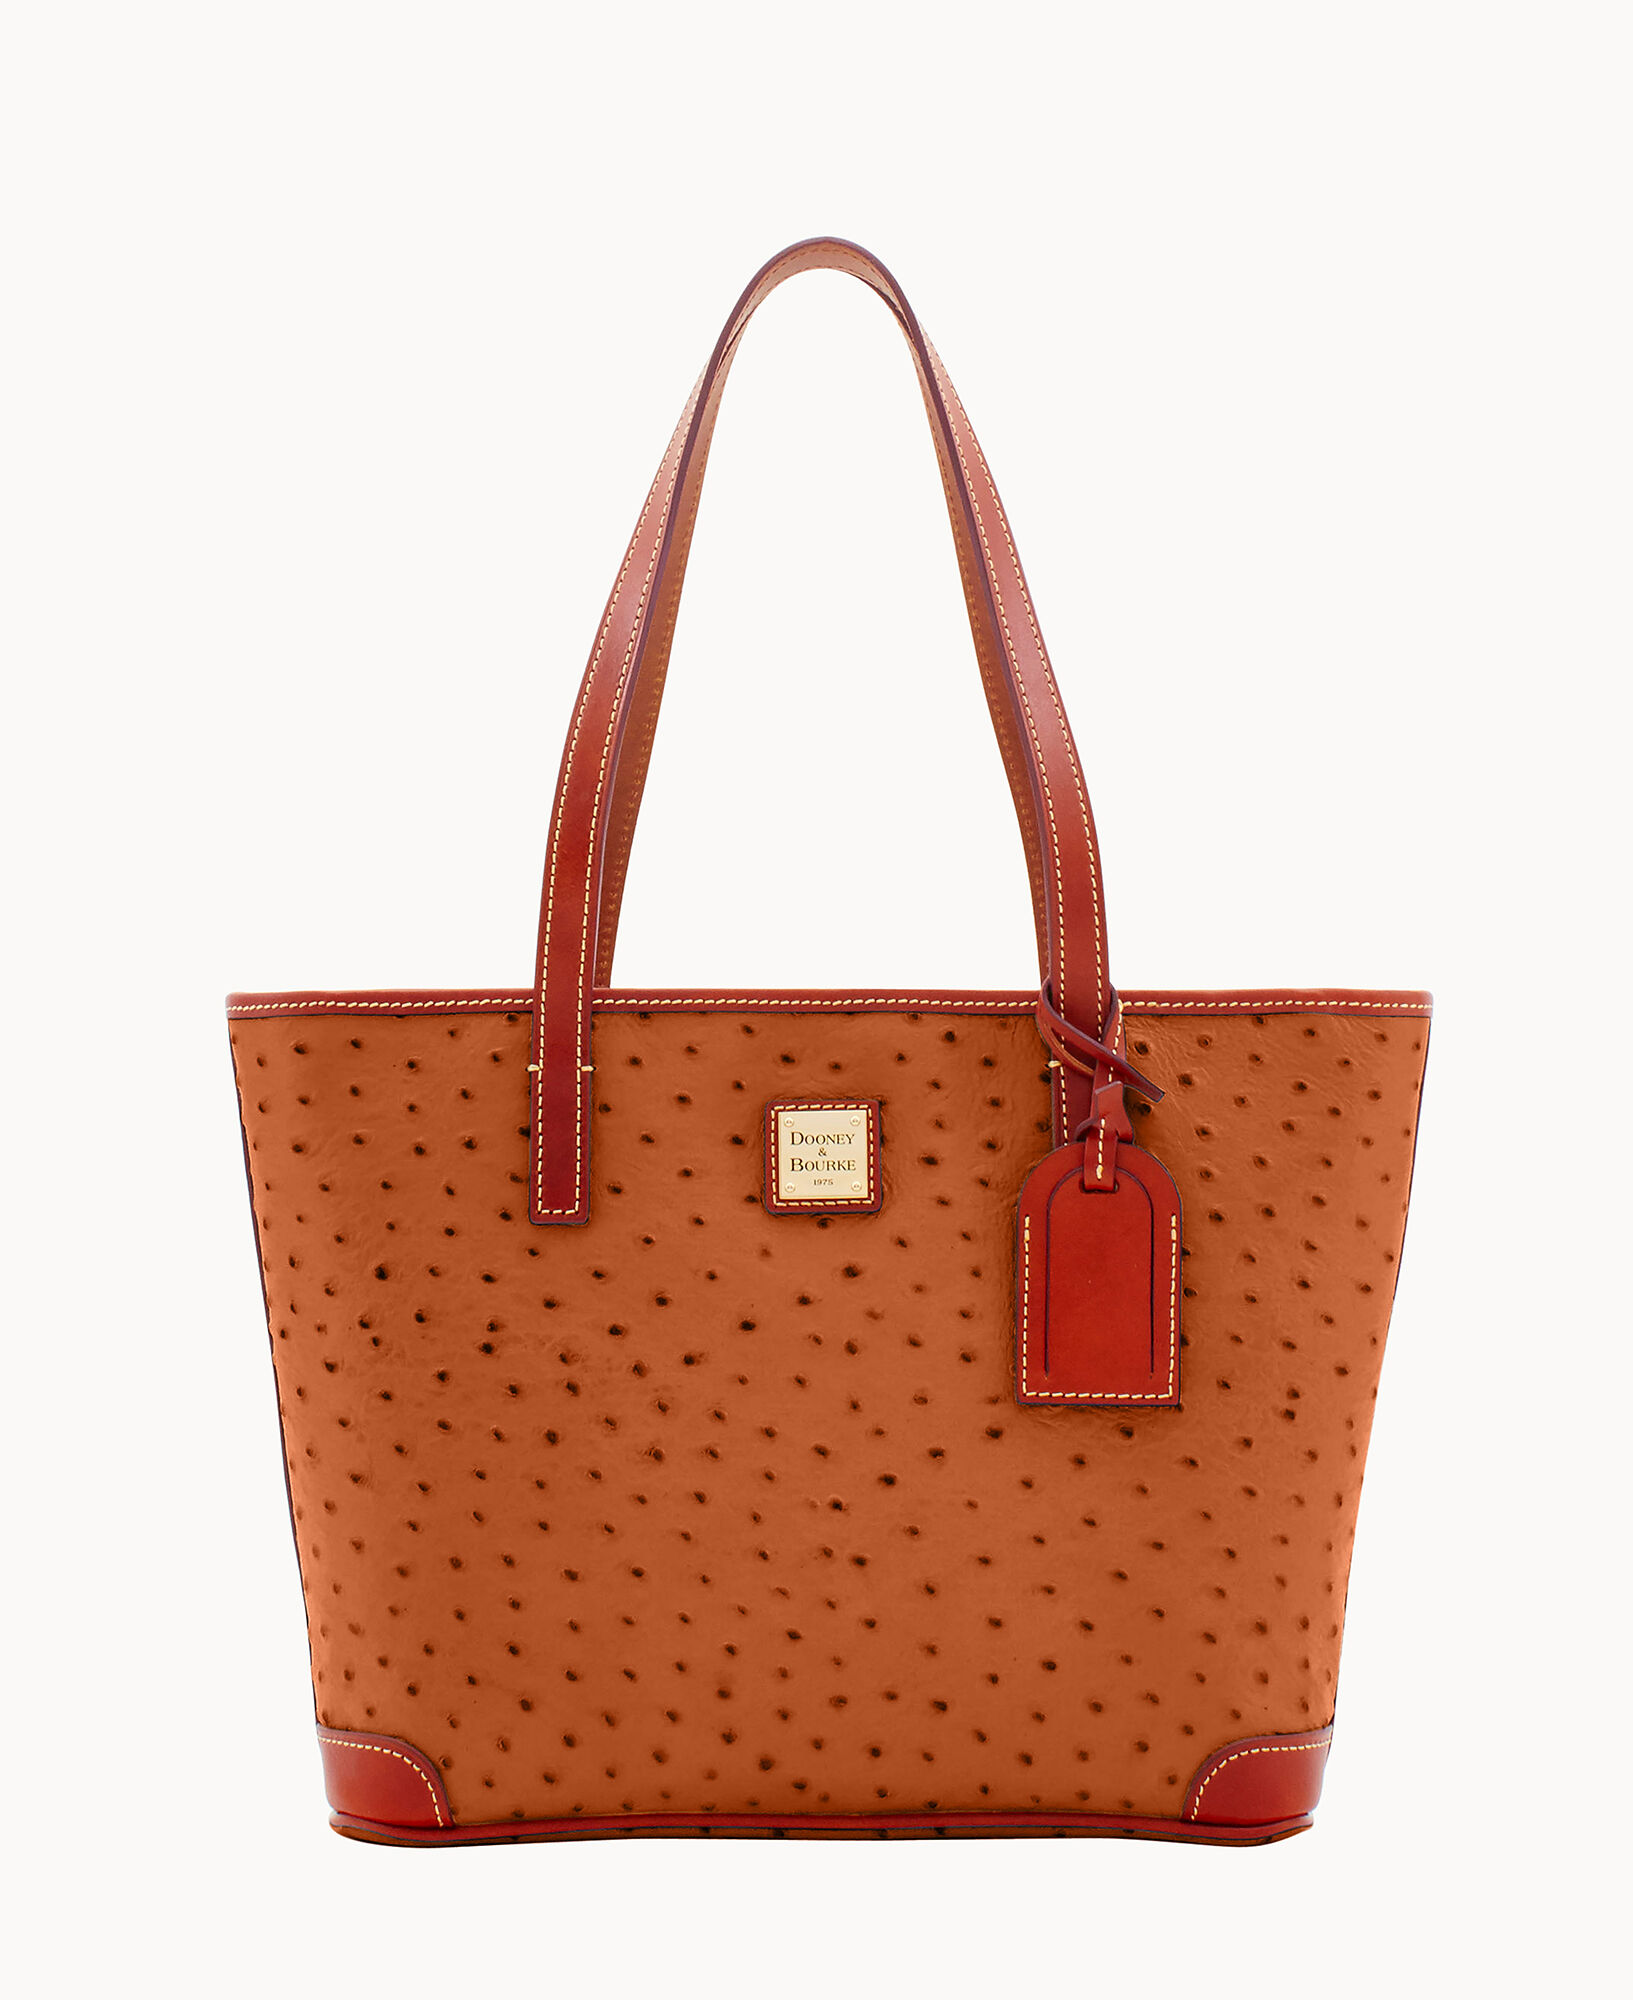 Dooney and Bourke Ostrich North-South Tote